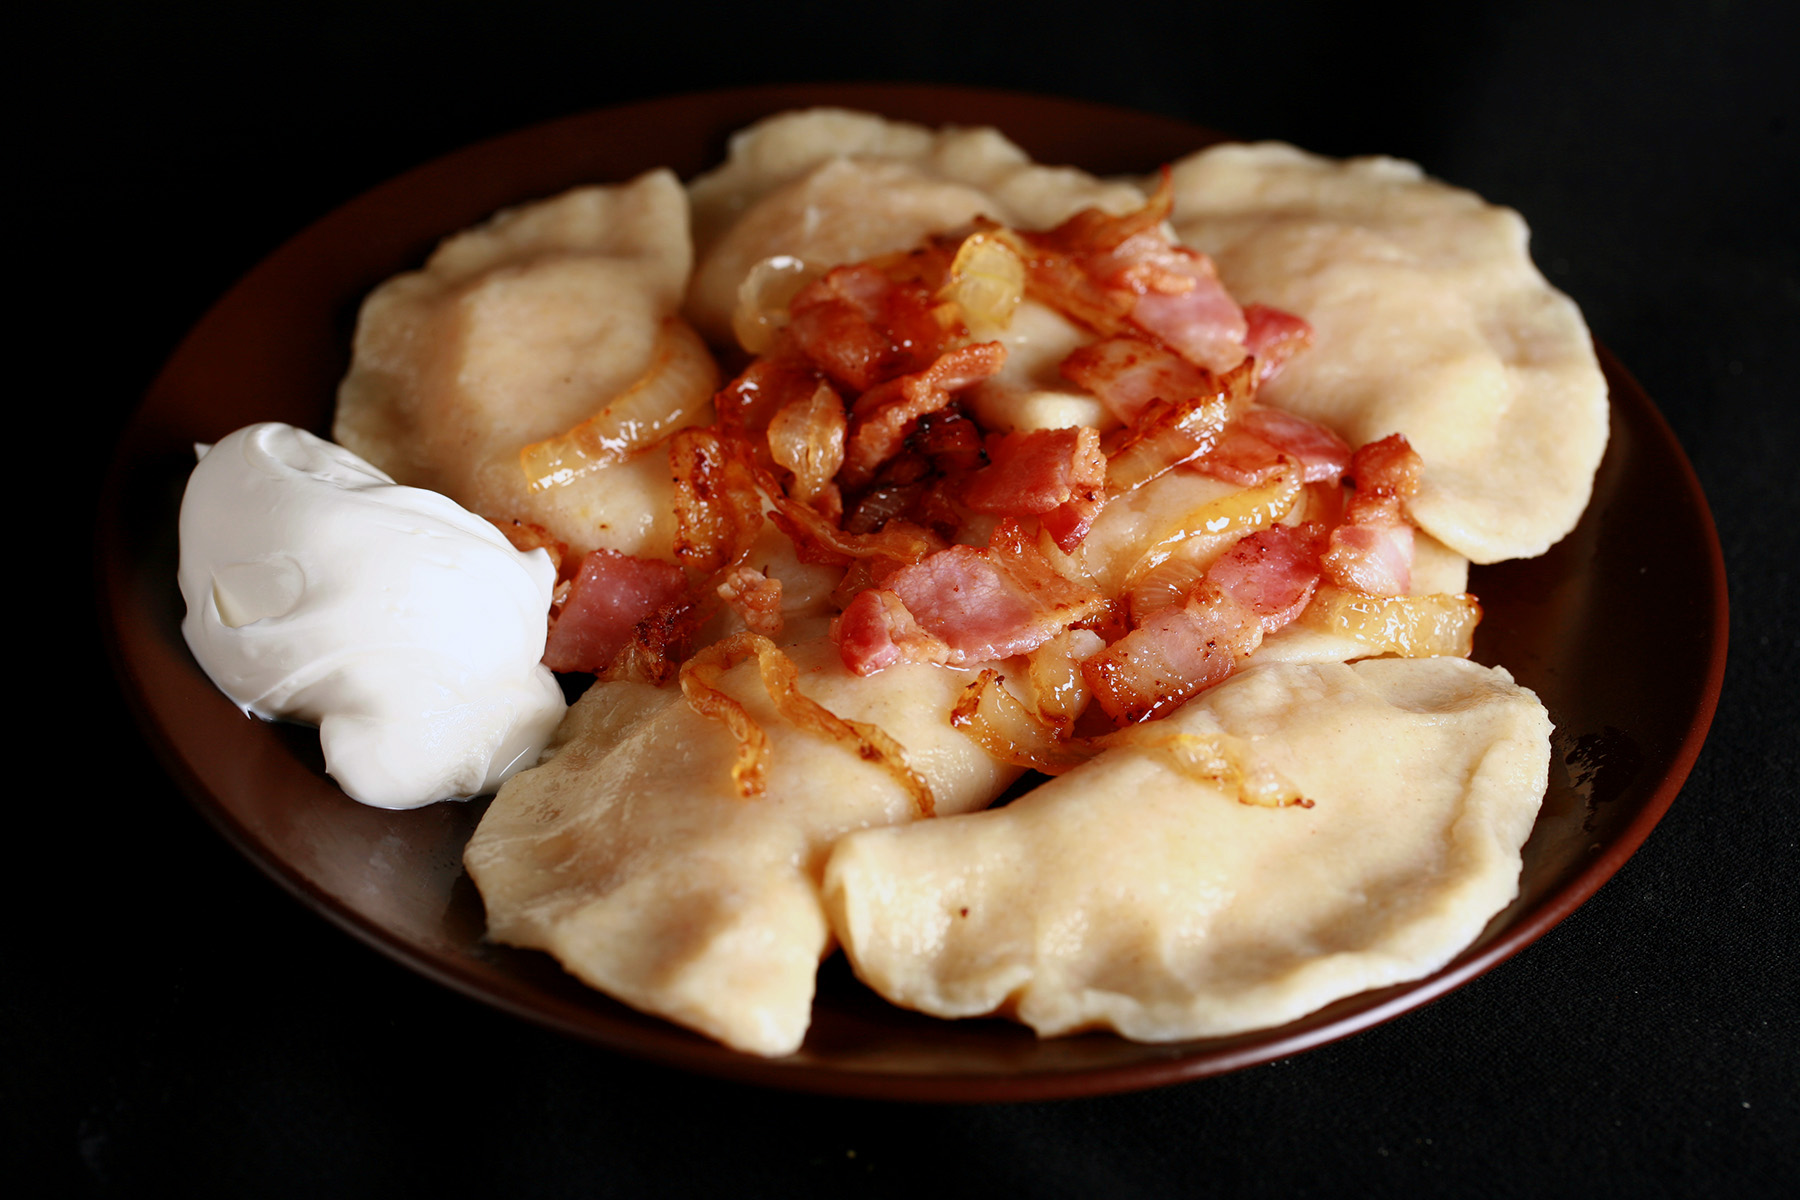 A plate of gluten-free perogies, topped with bacon, fried onions, and sour cream.